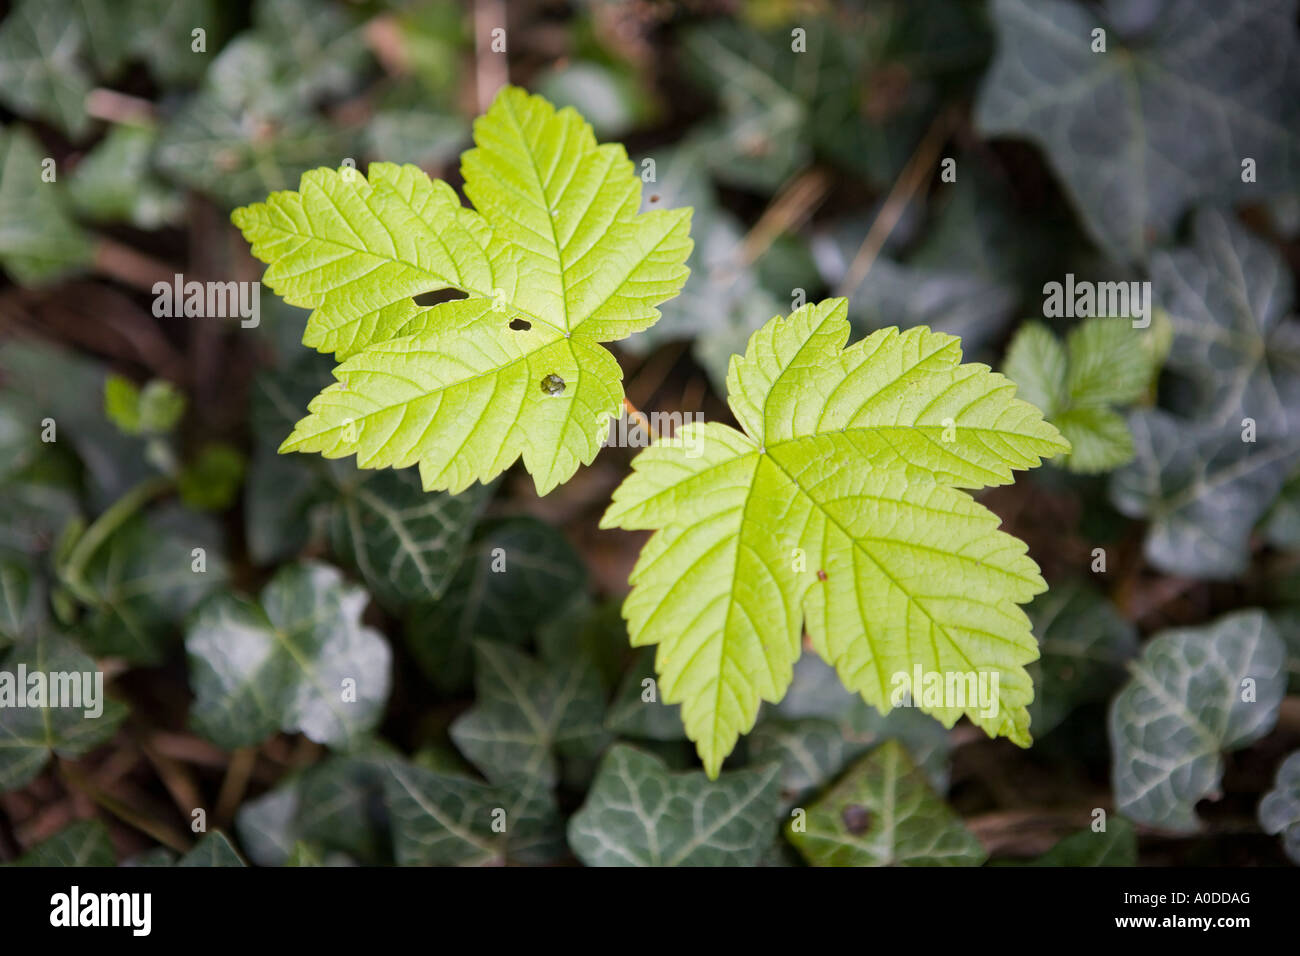 Acer pseudoplatanus seedling with pest damage growing through ivy groundcover Stock Photo